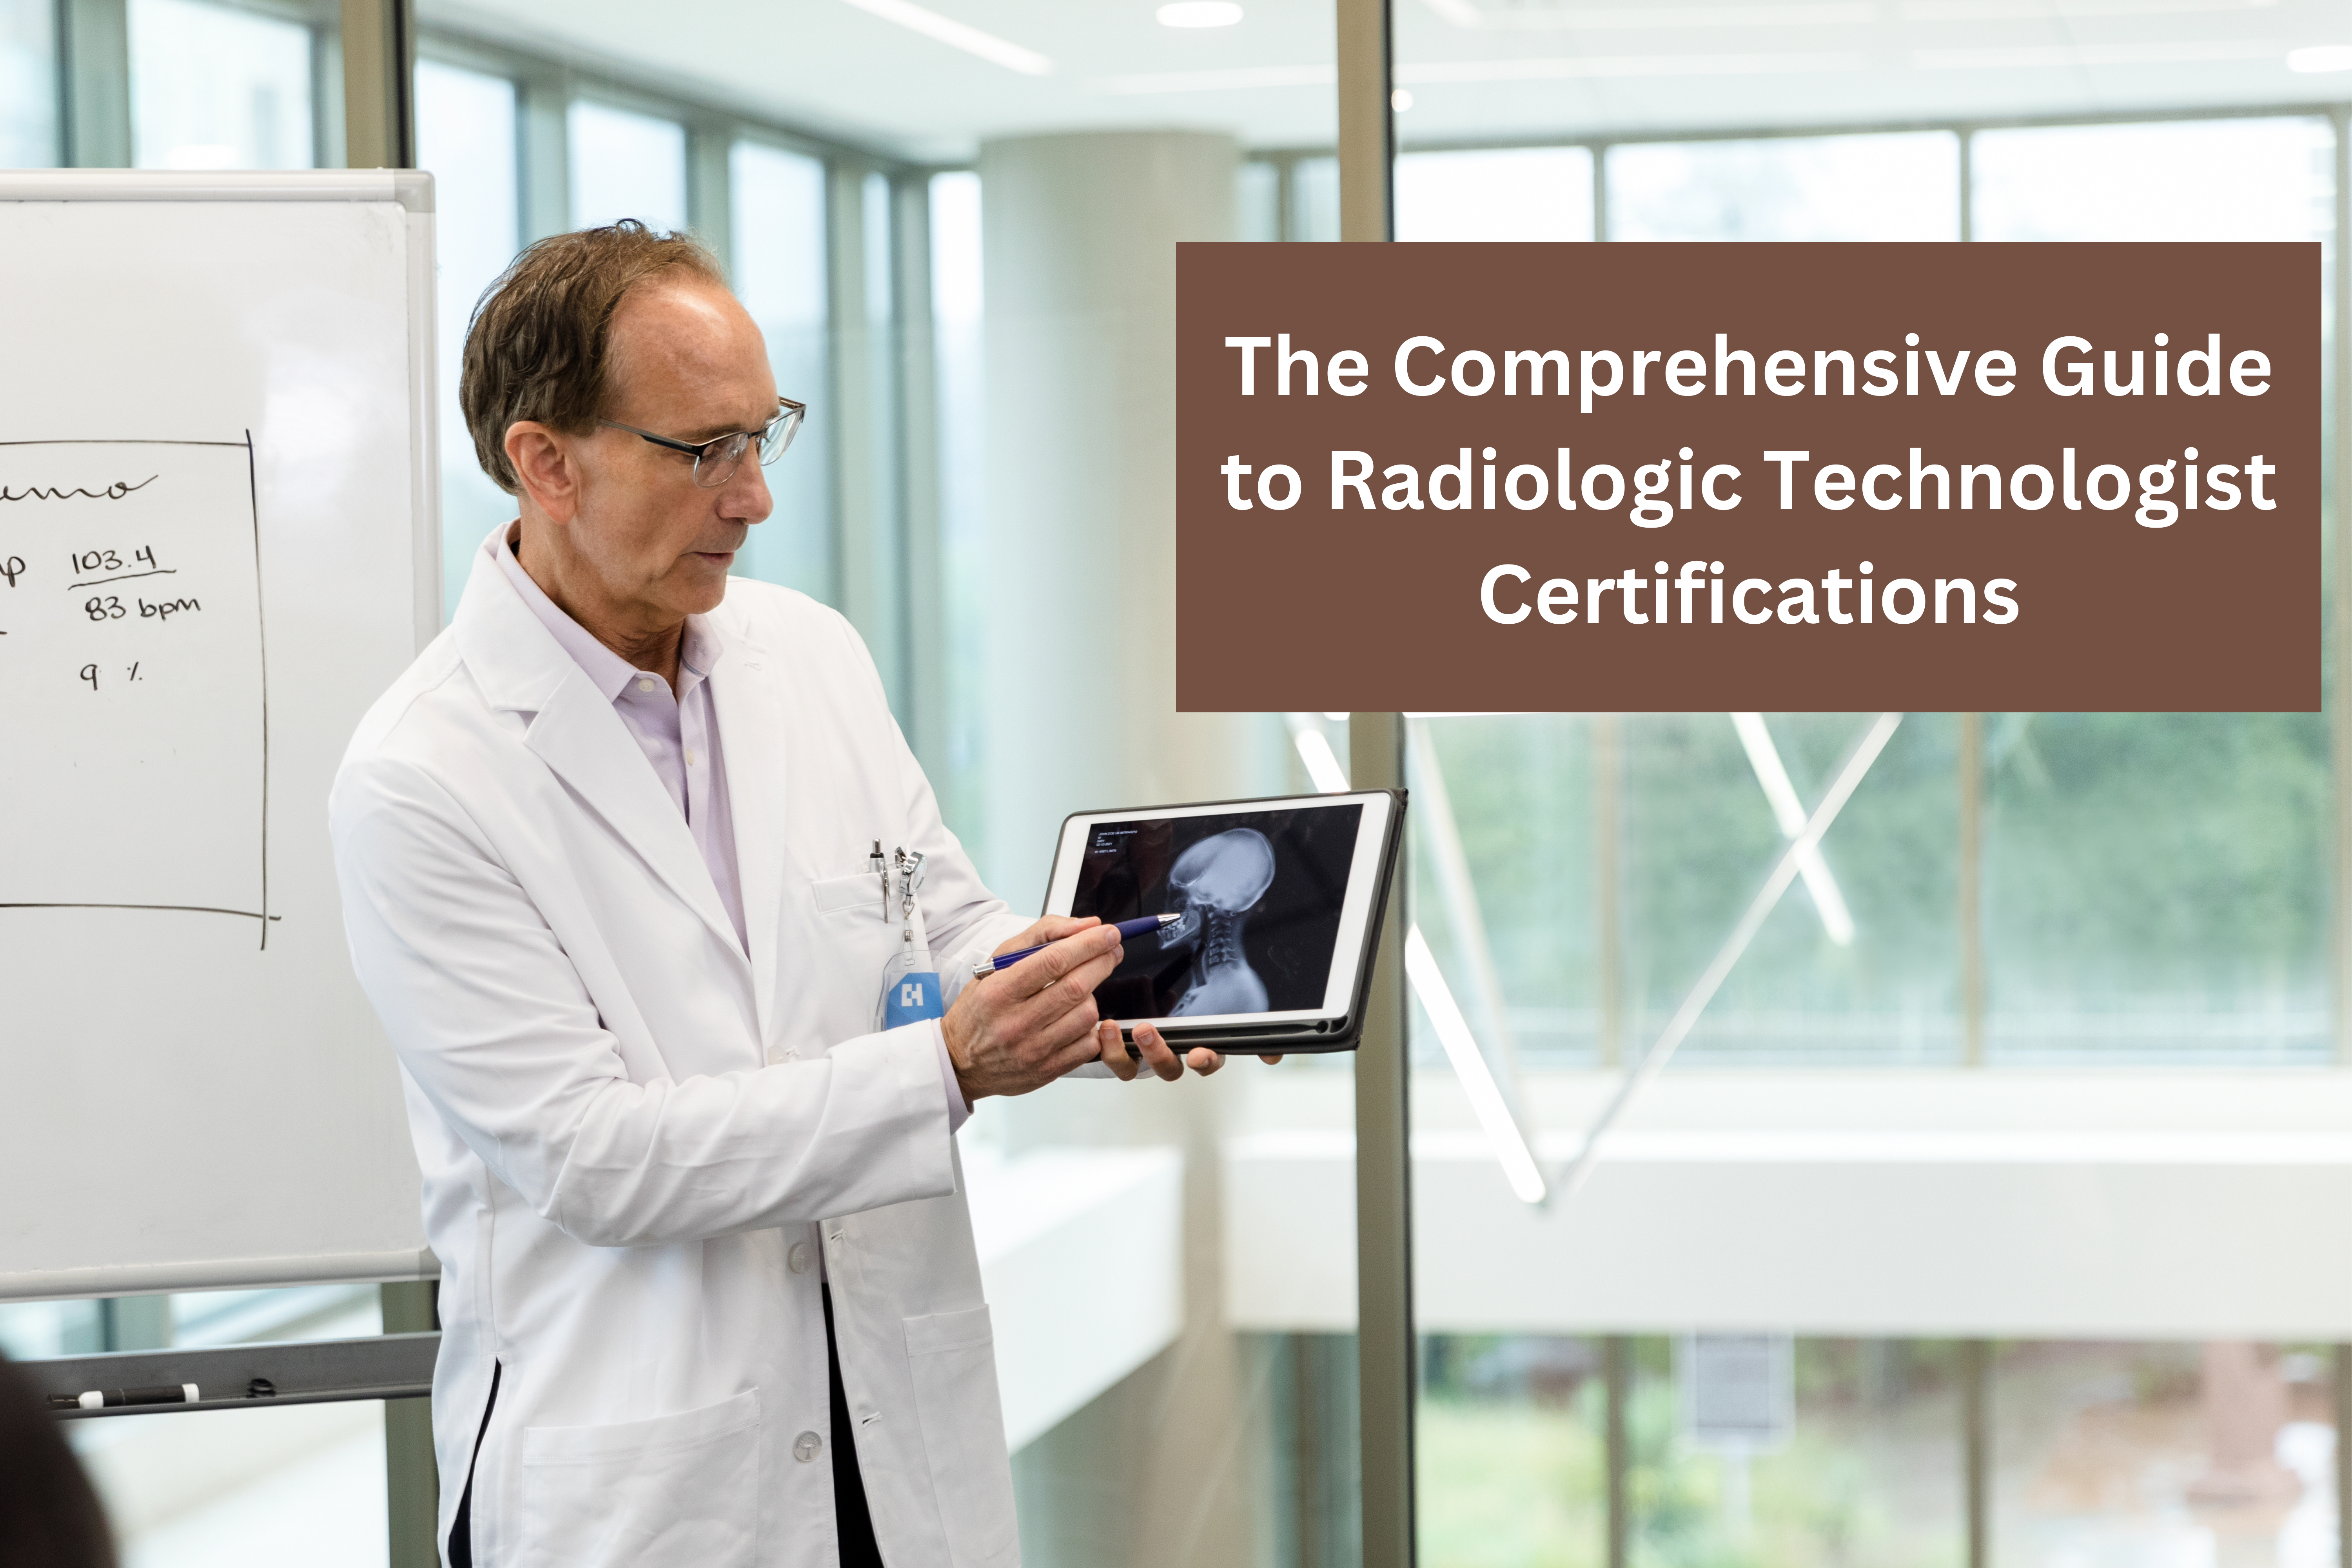 The Comprehensive Guide to Radiologic Technologist Certifications